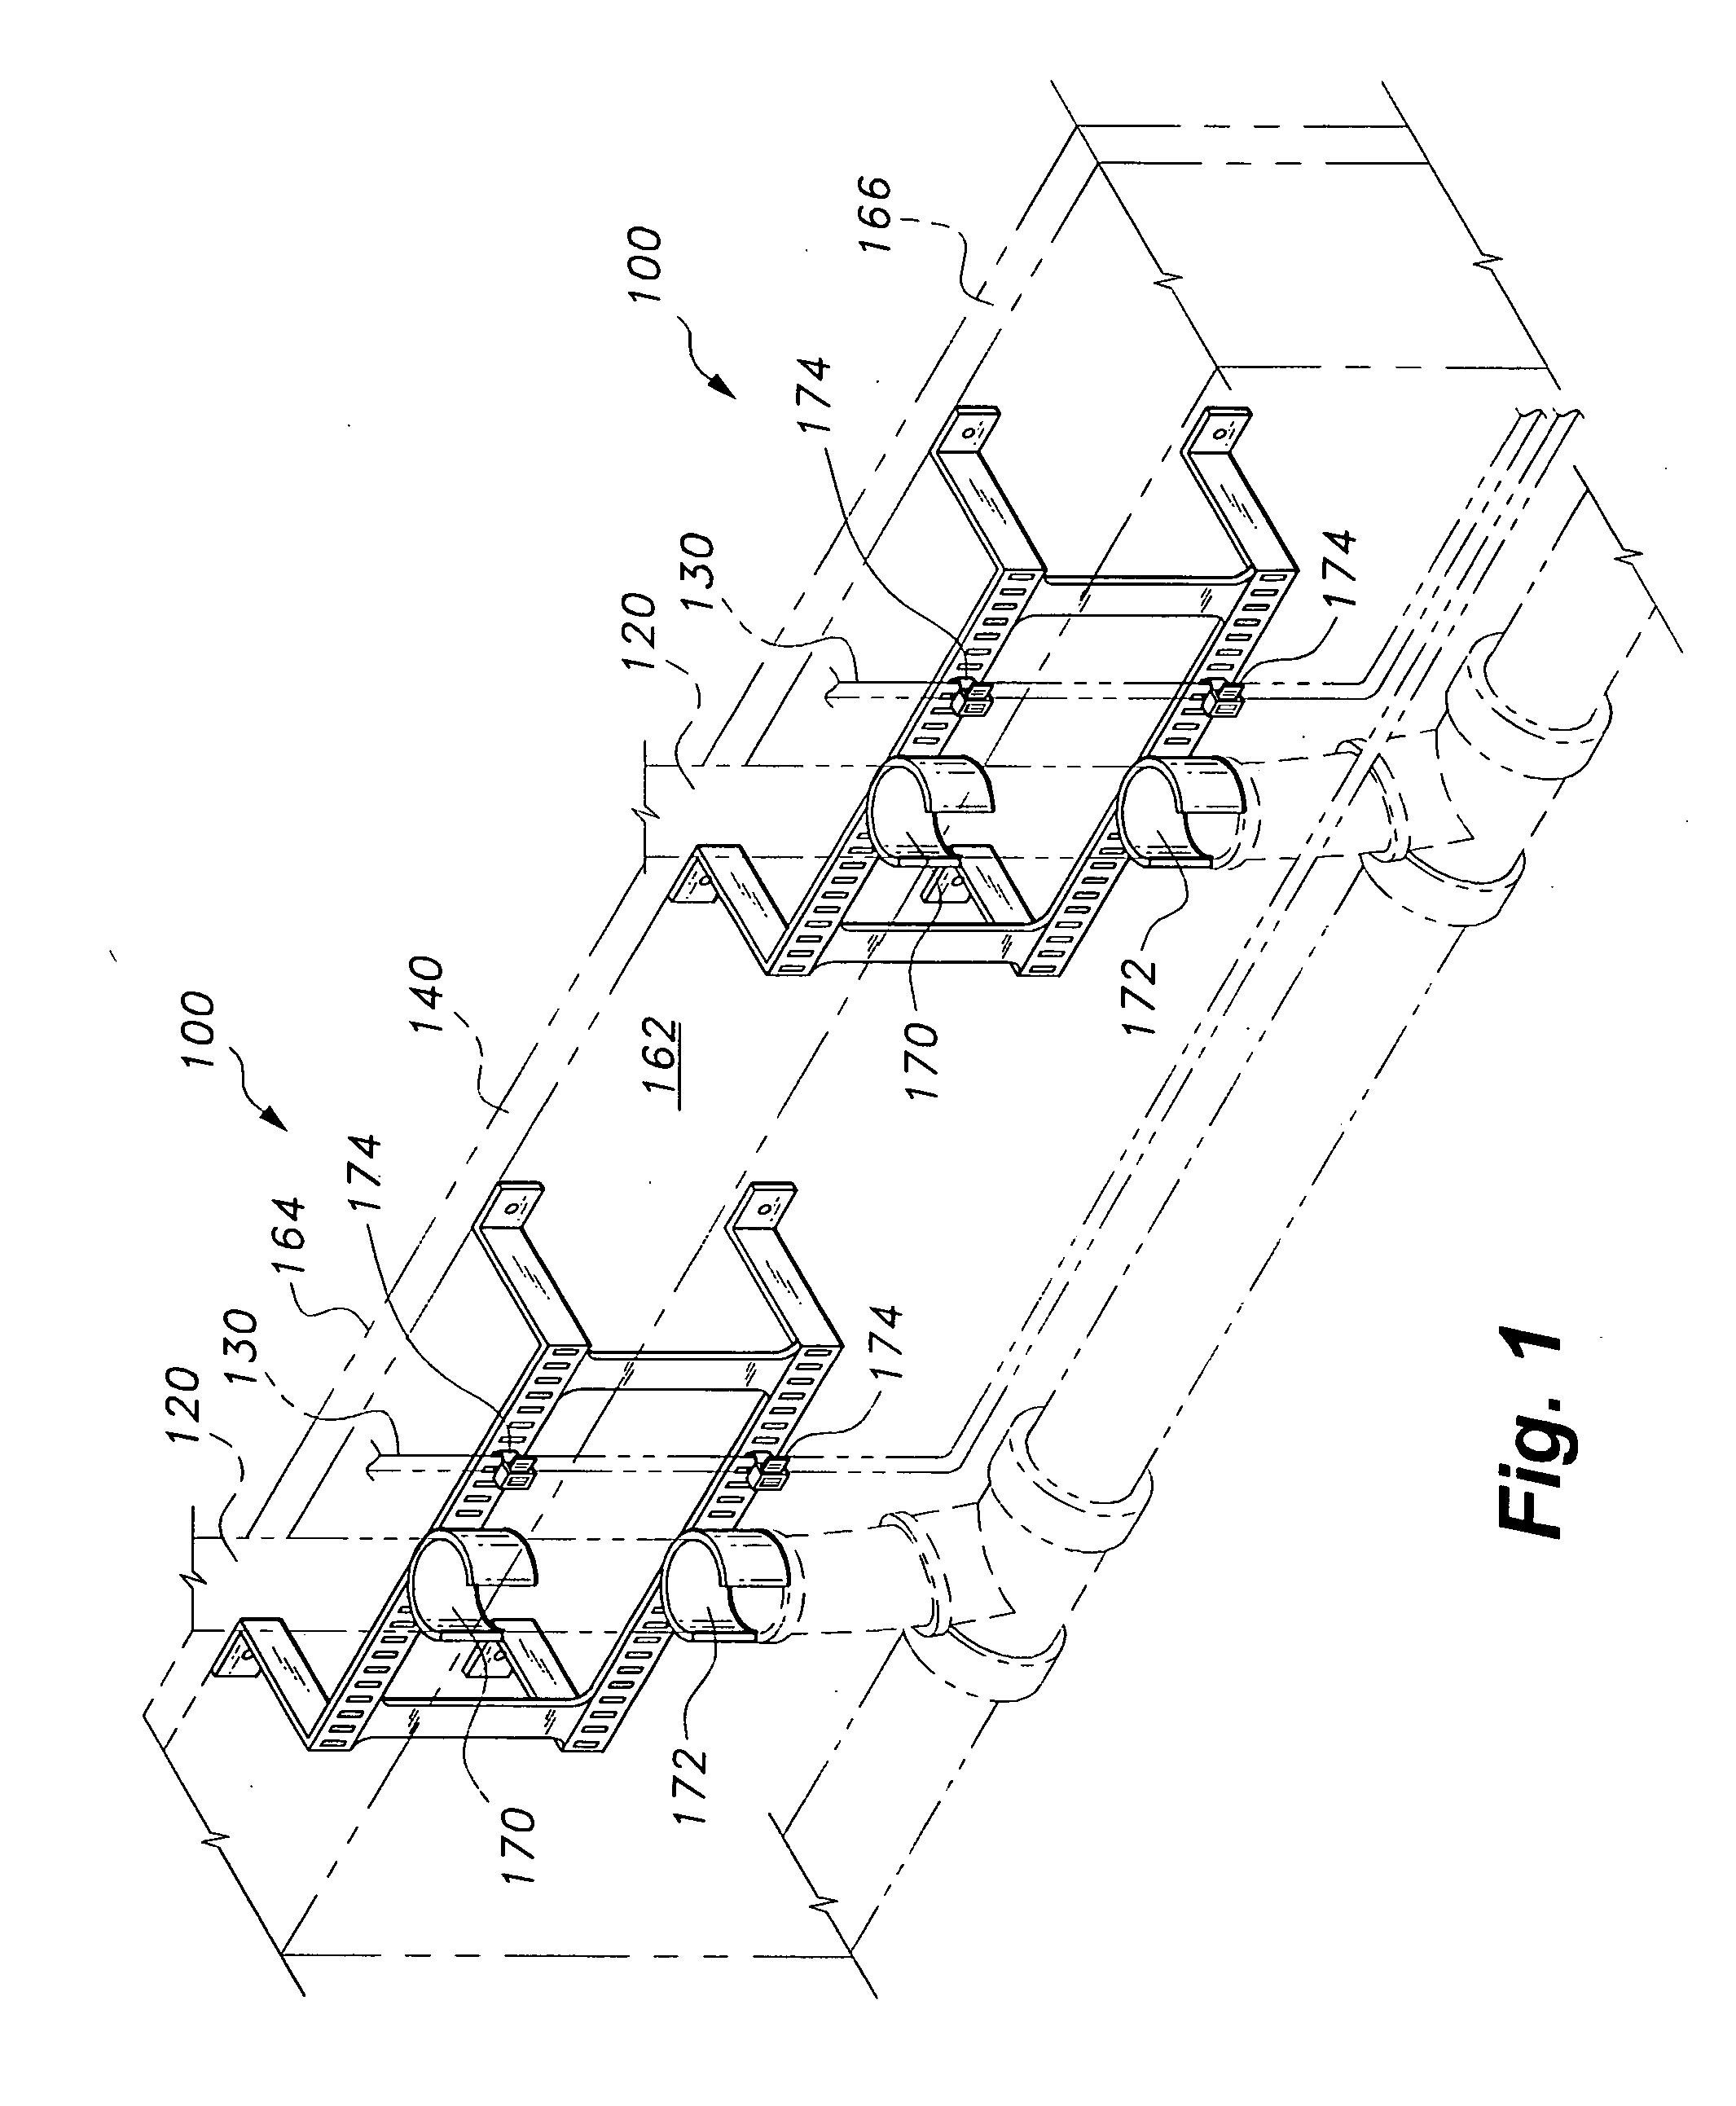 Alignment and support apparatus